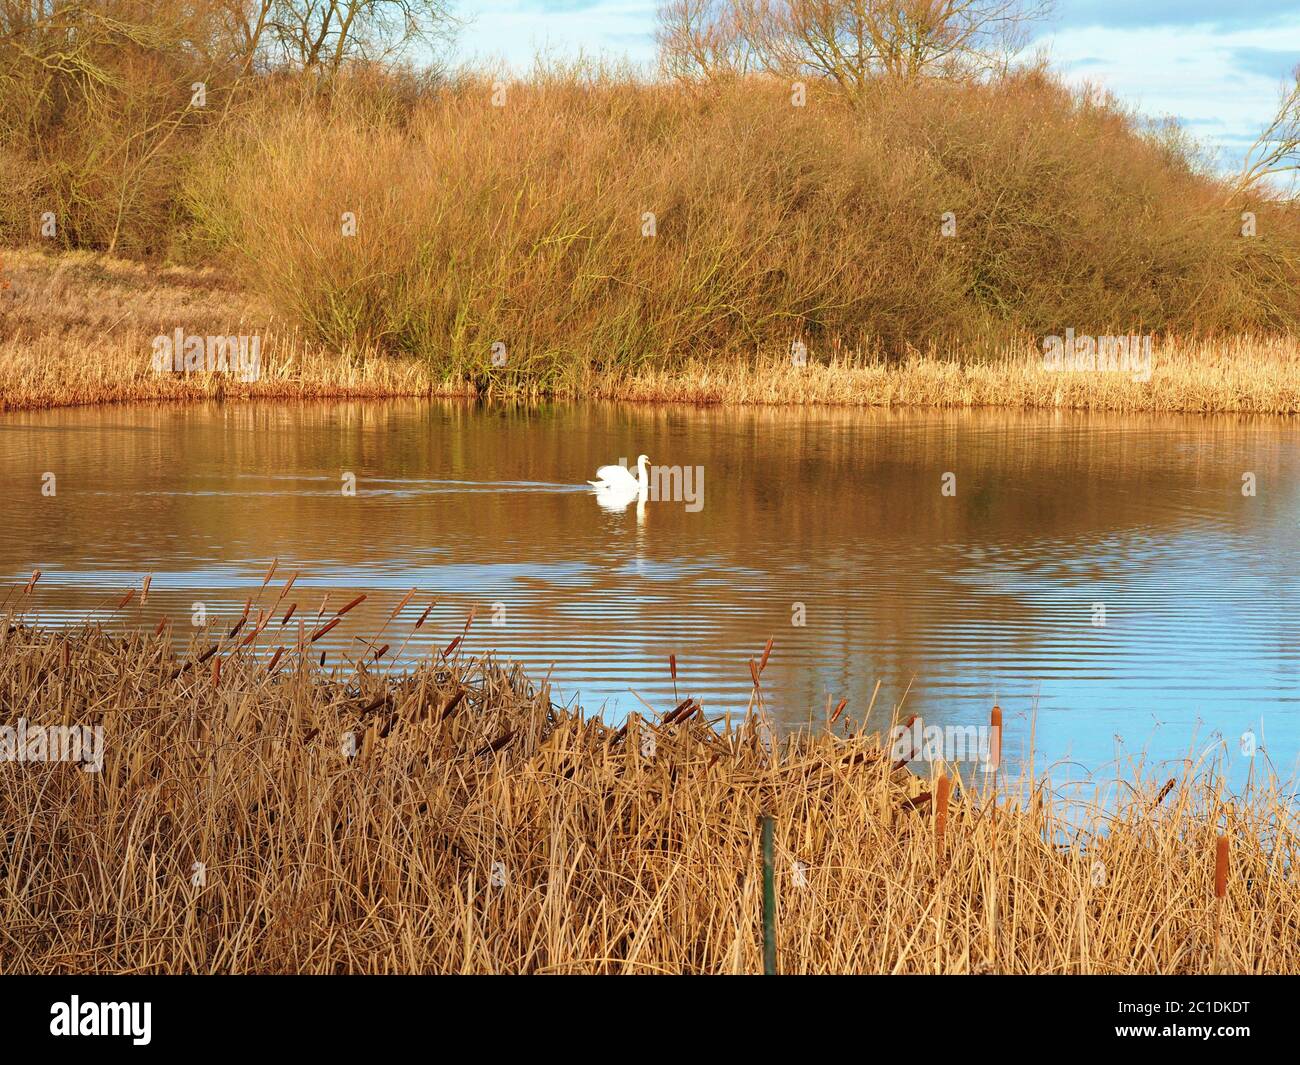 Mute swan in a lake surrounded by golden autumn reeds in Staveley Nature Reserve, North Yorkshire, England Stock Photo